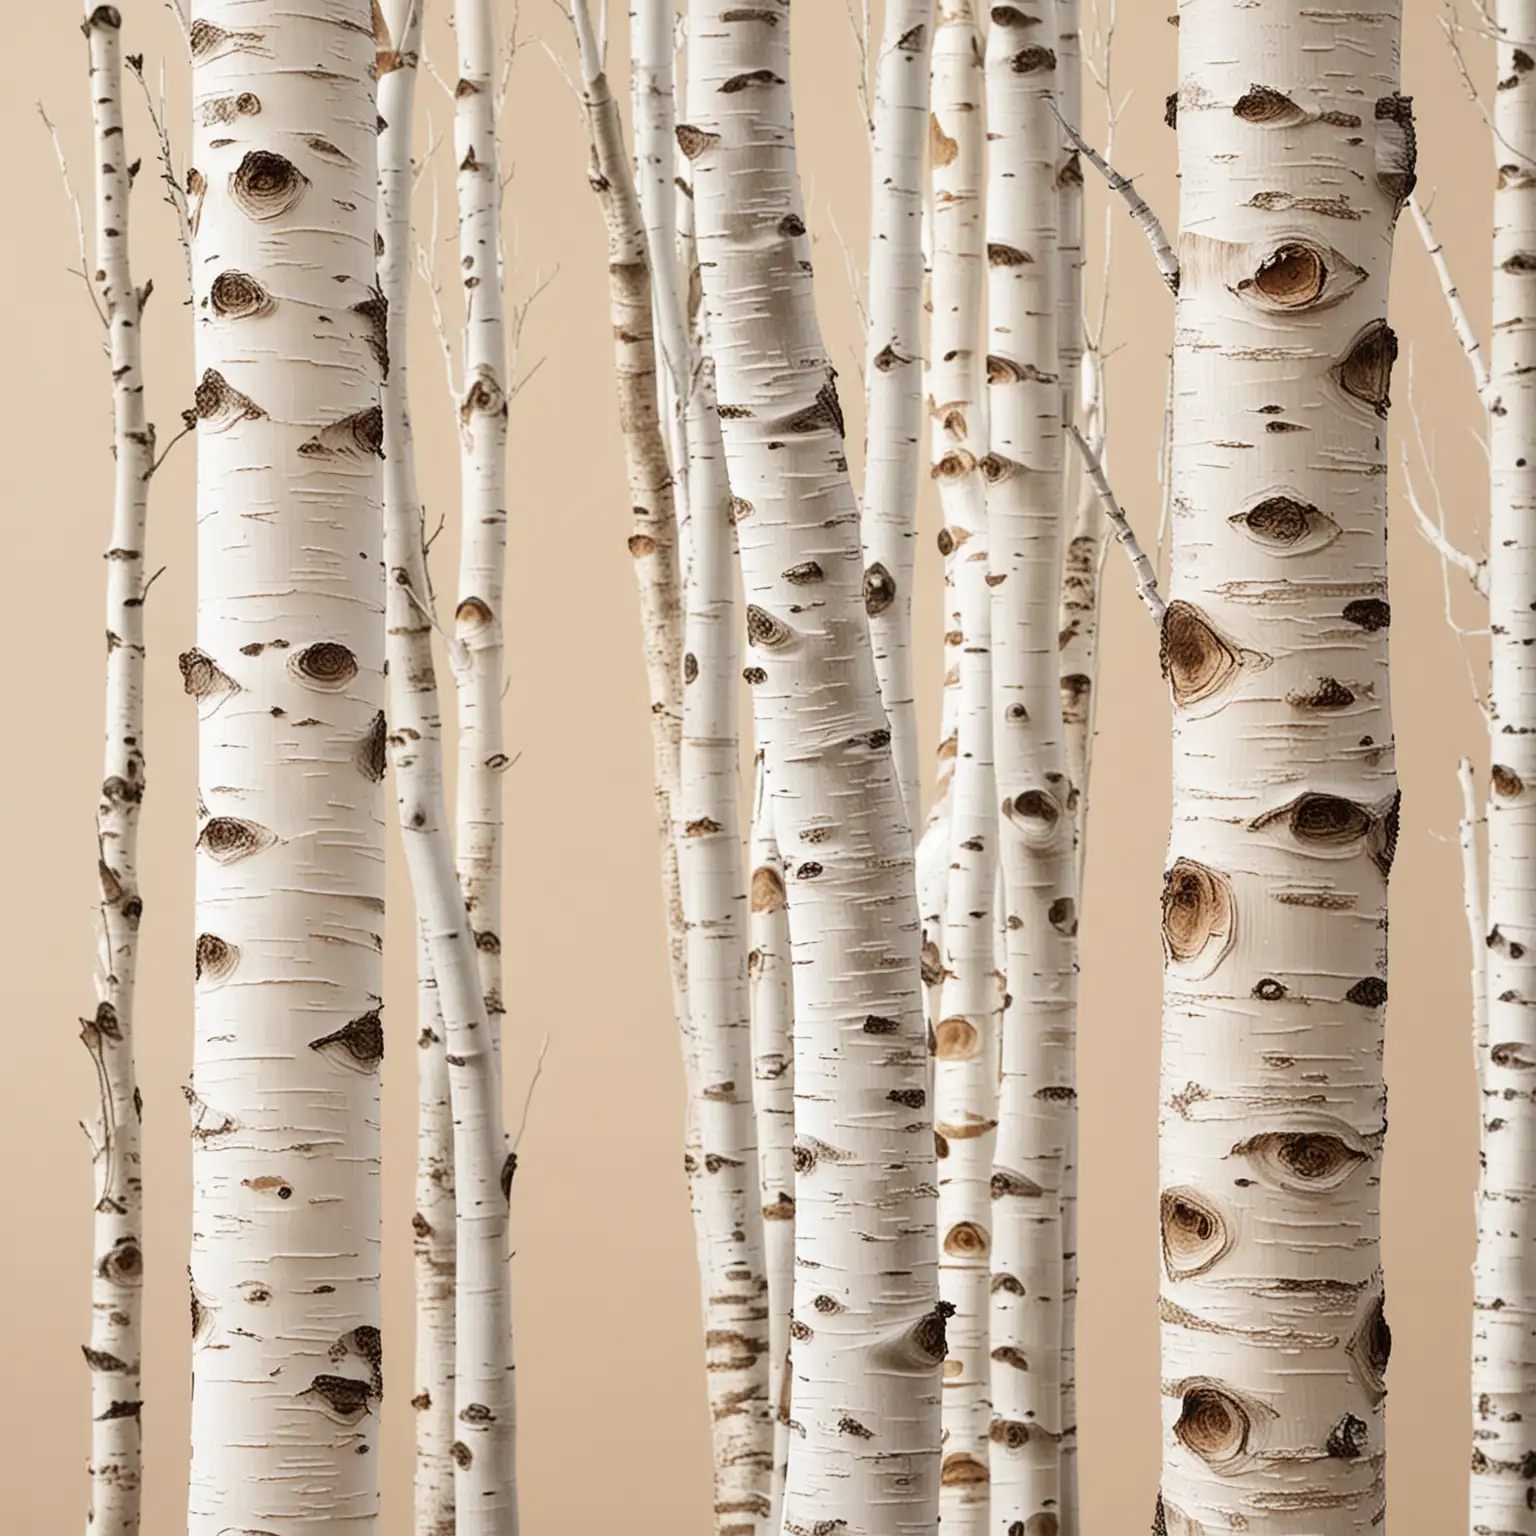 pale abstract soft colors line of Birch tree trunks close up with beige background..
